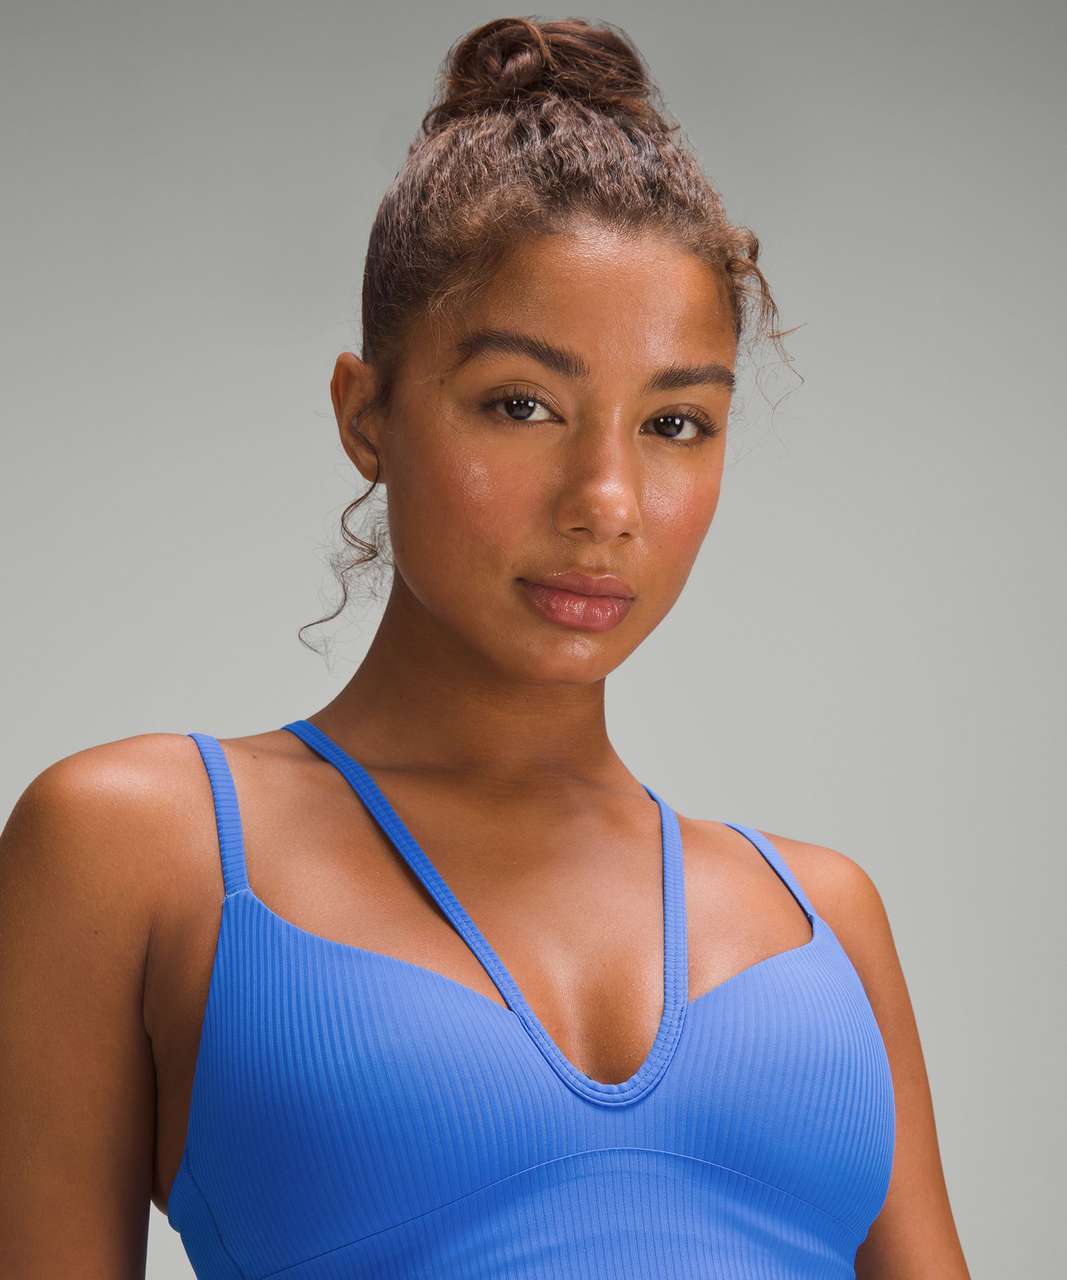 Love Cloud Strappy Ruched Sports Bra